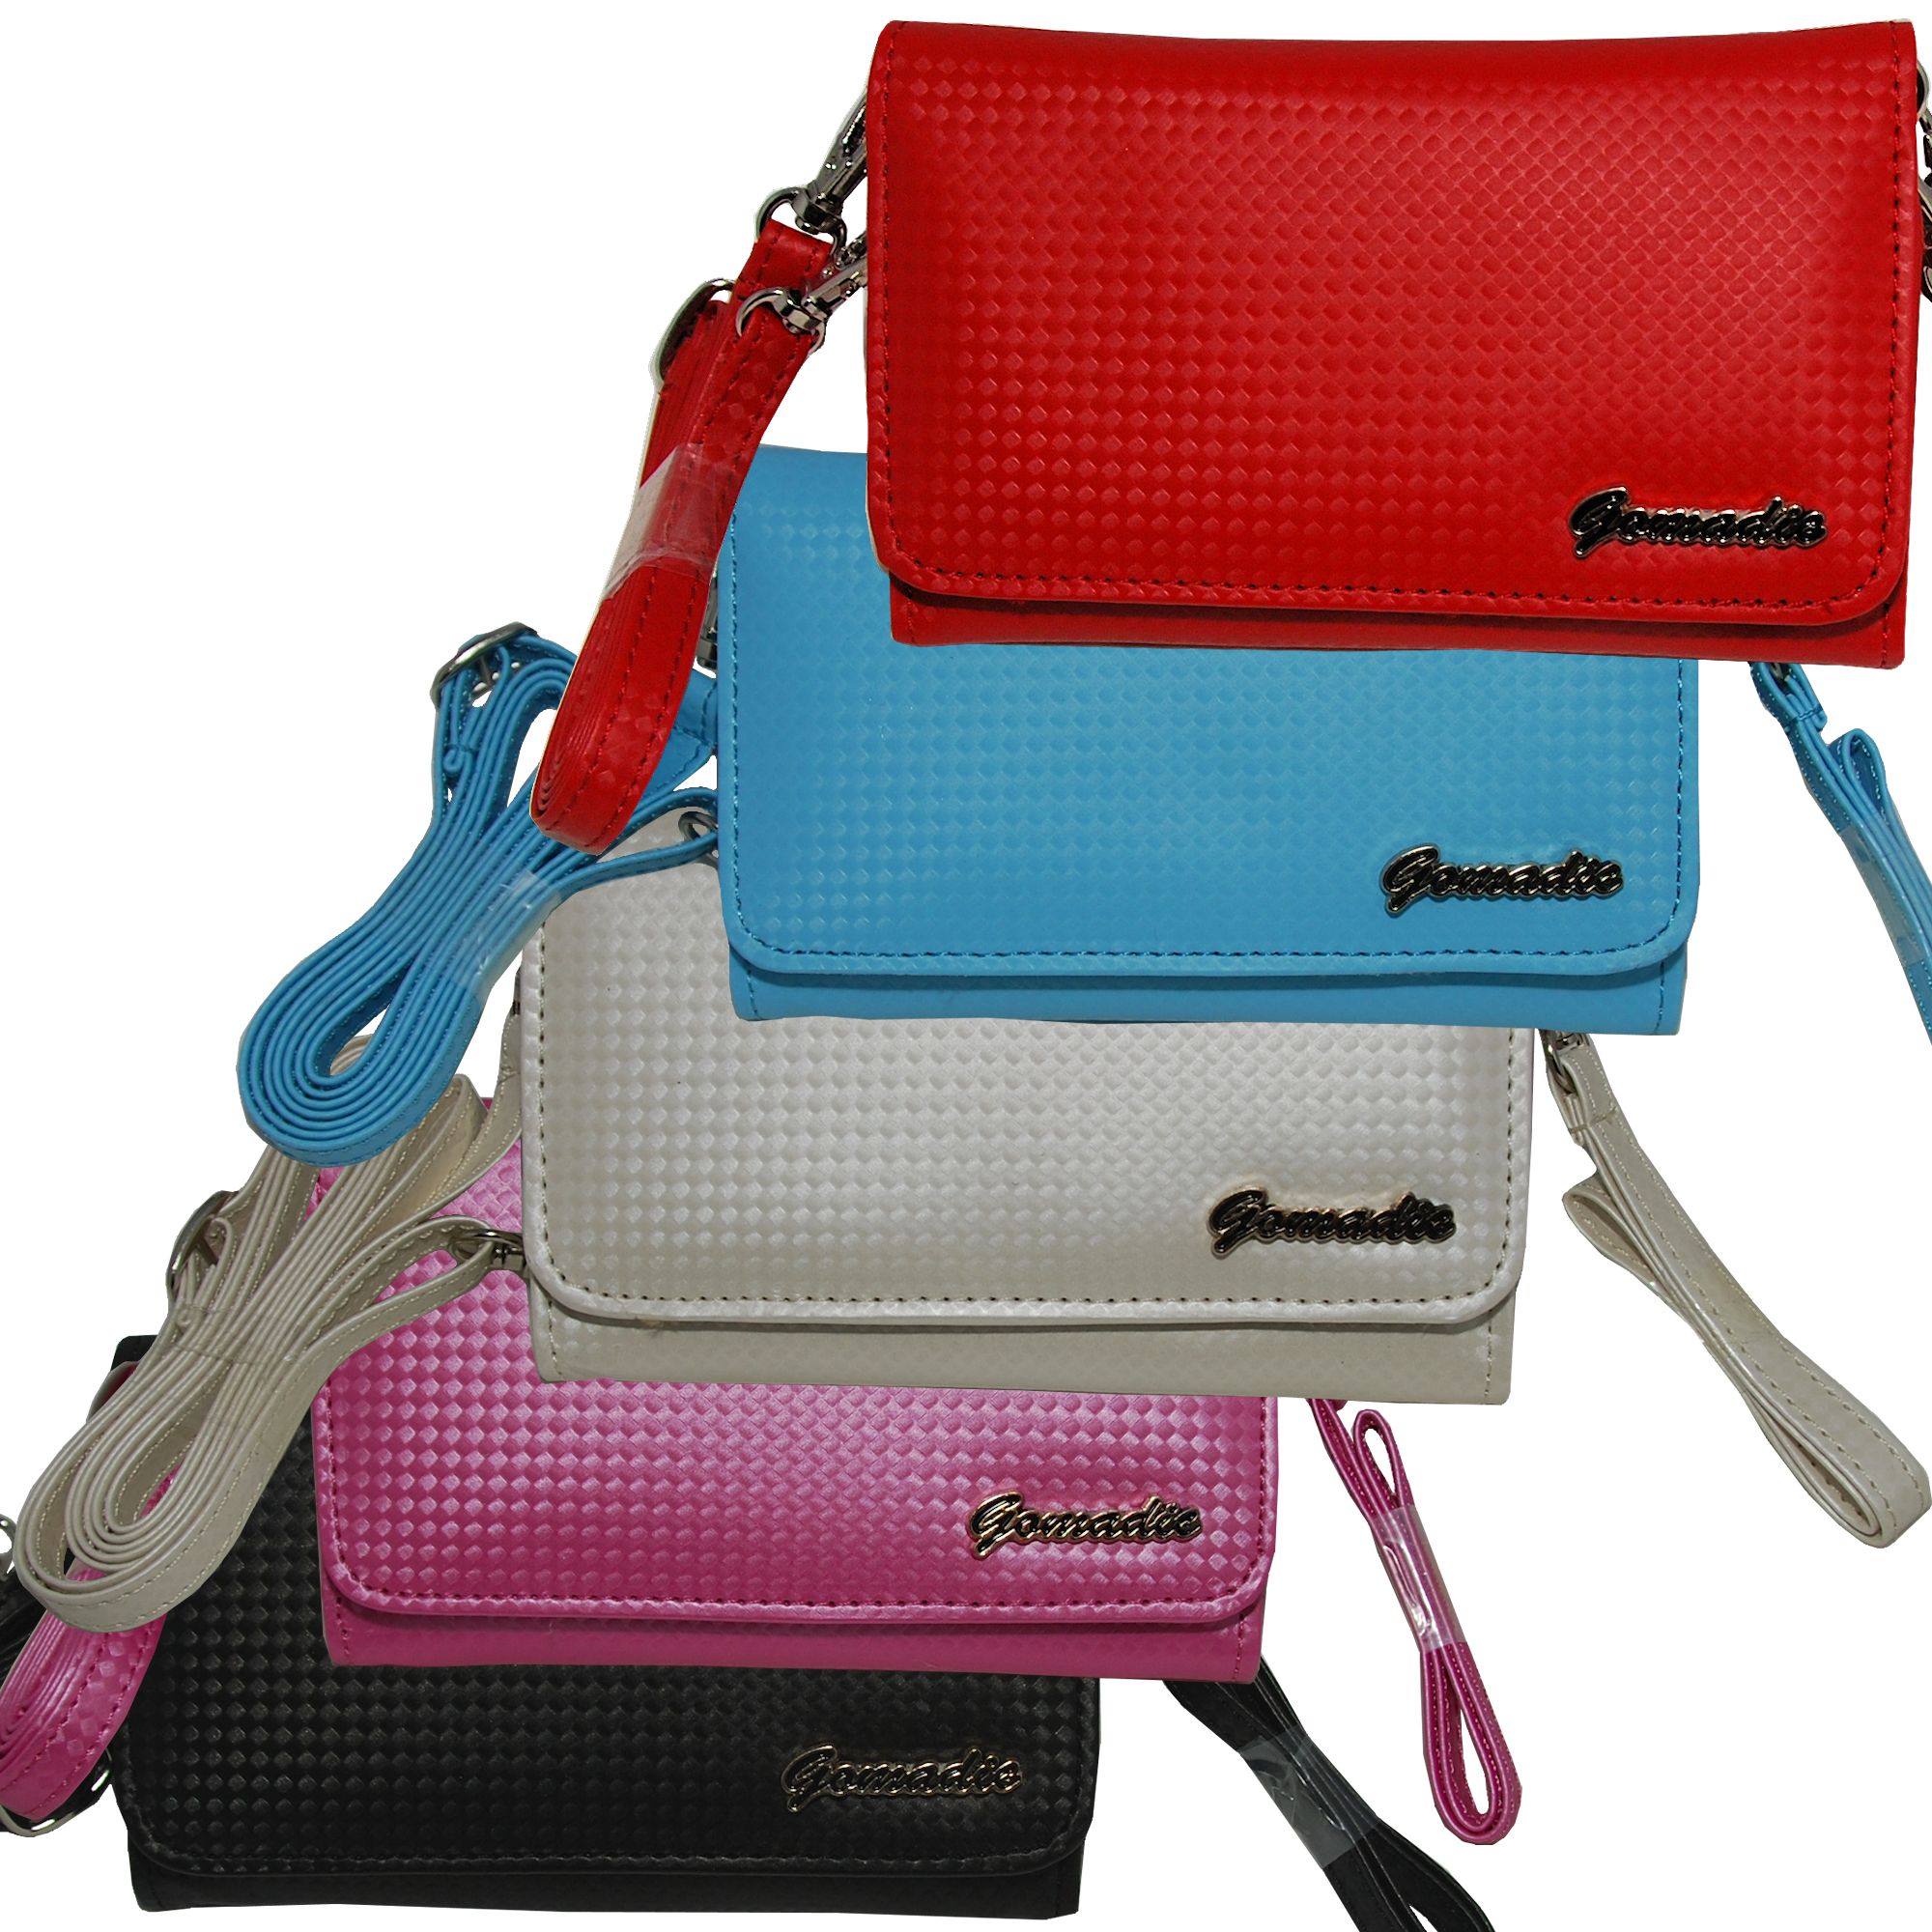 Purse Handbag Case for the Nokia 6300 6301 6555 6650 with both a hand and shoulder loop - Color Options Blue Pink White Black and Red